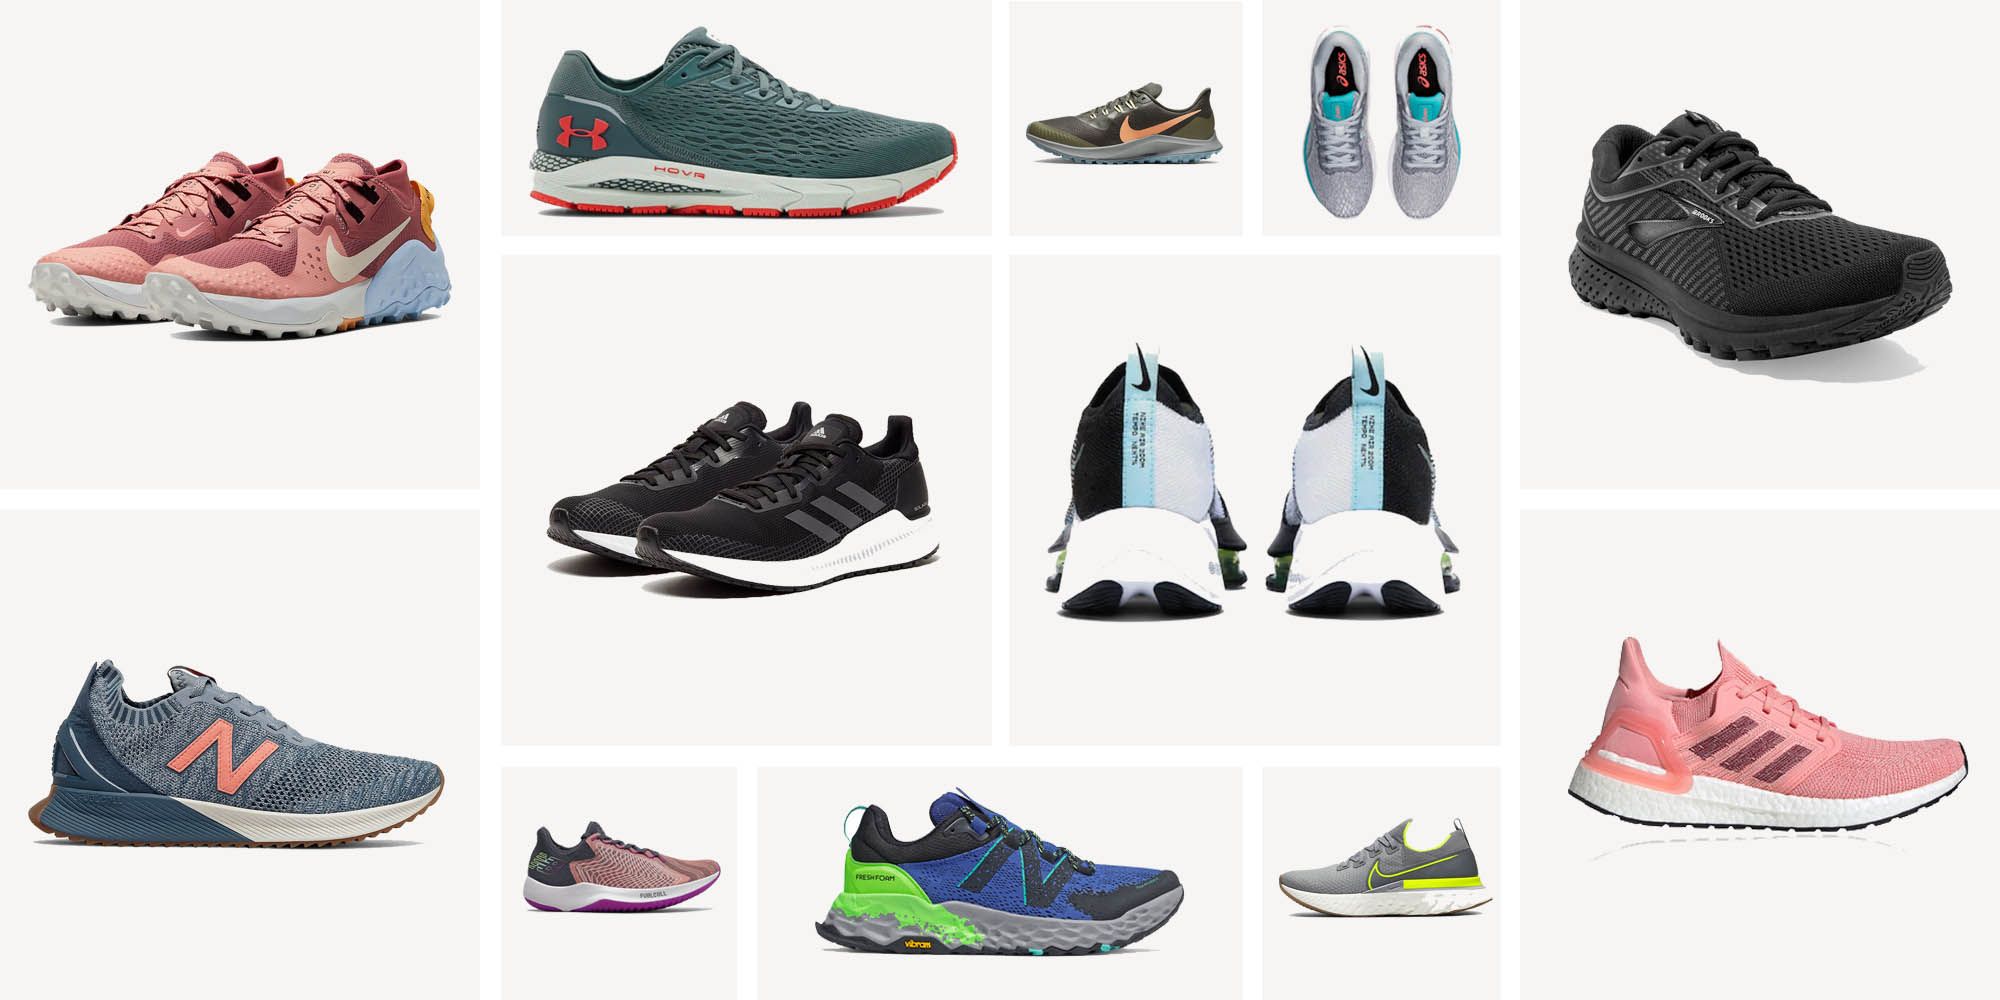 Black Friday Deals On Shoes Online Sale, UP TO 60% OFF